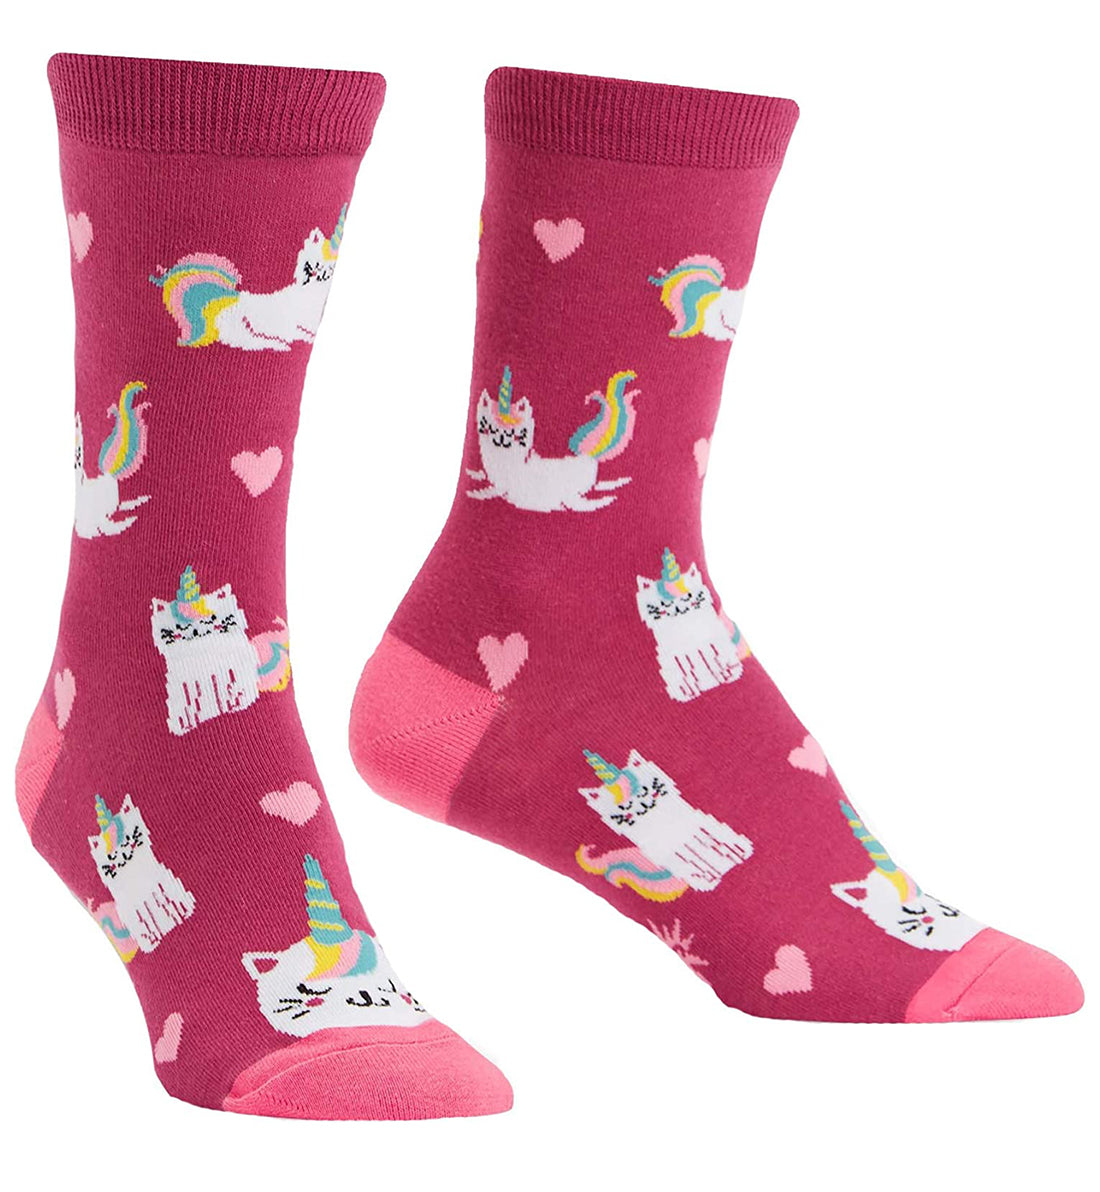 SOCK it to me Women's Crew Socks (w0201),Look At Me Meow - Look At Me Meow,One Size